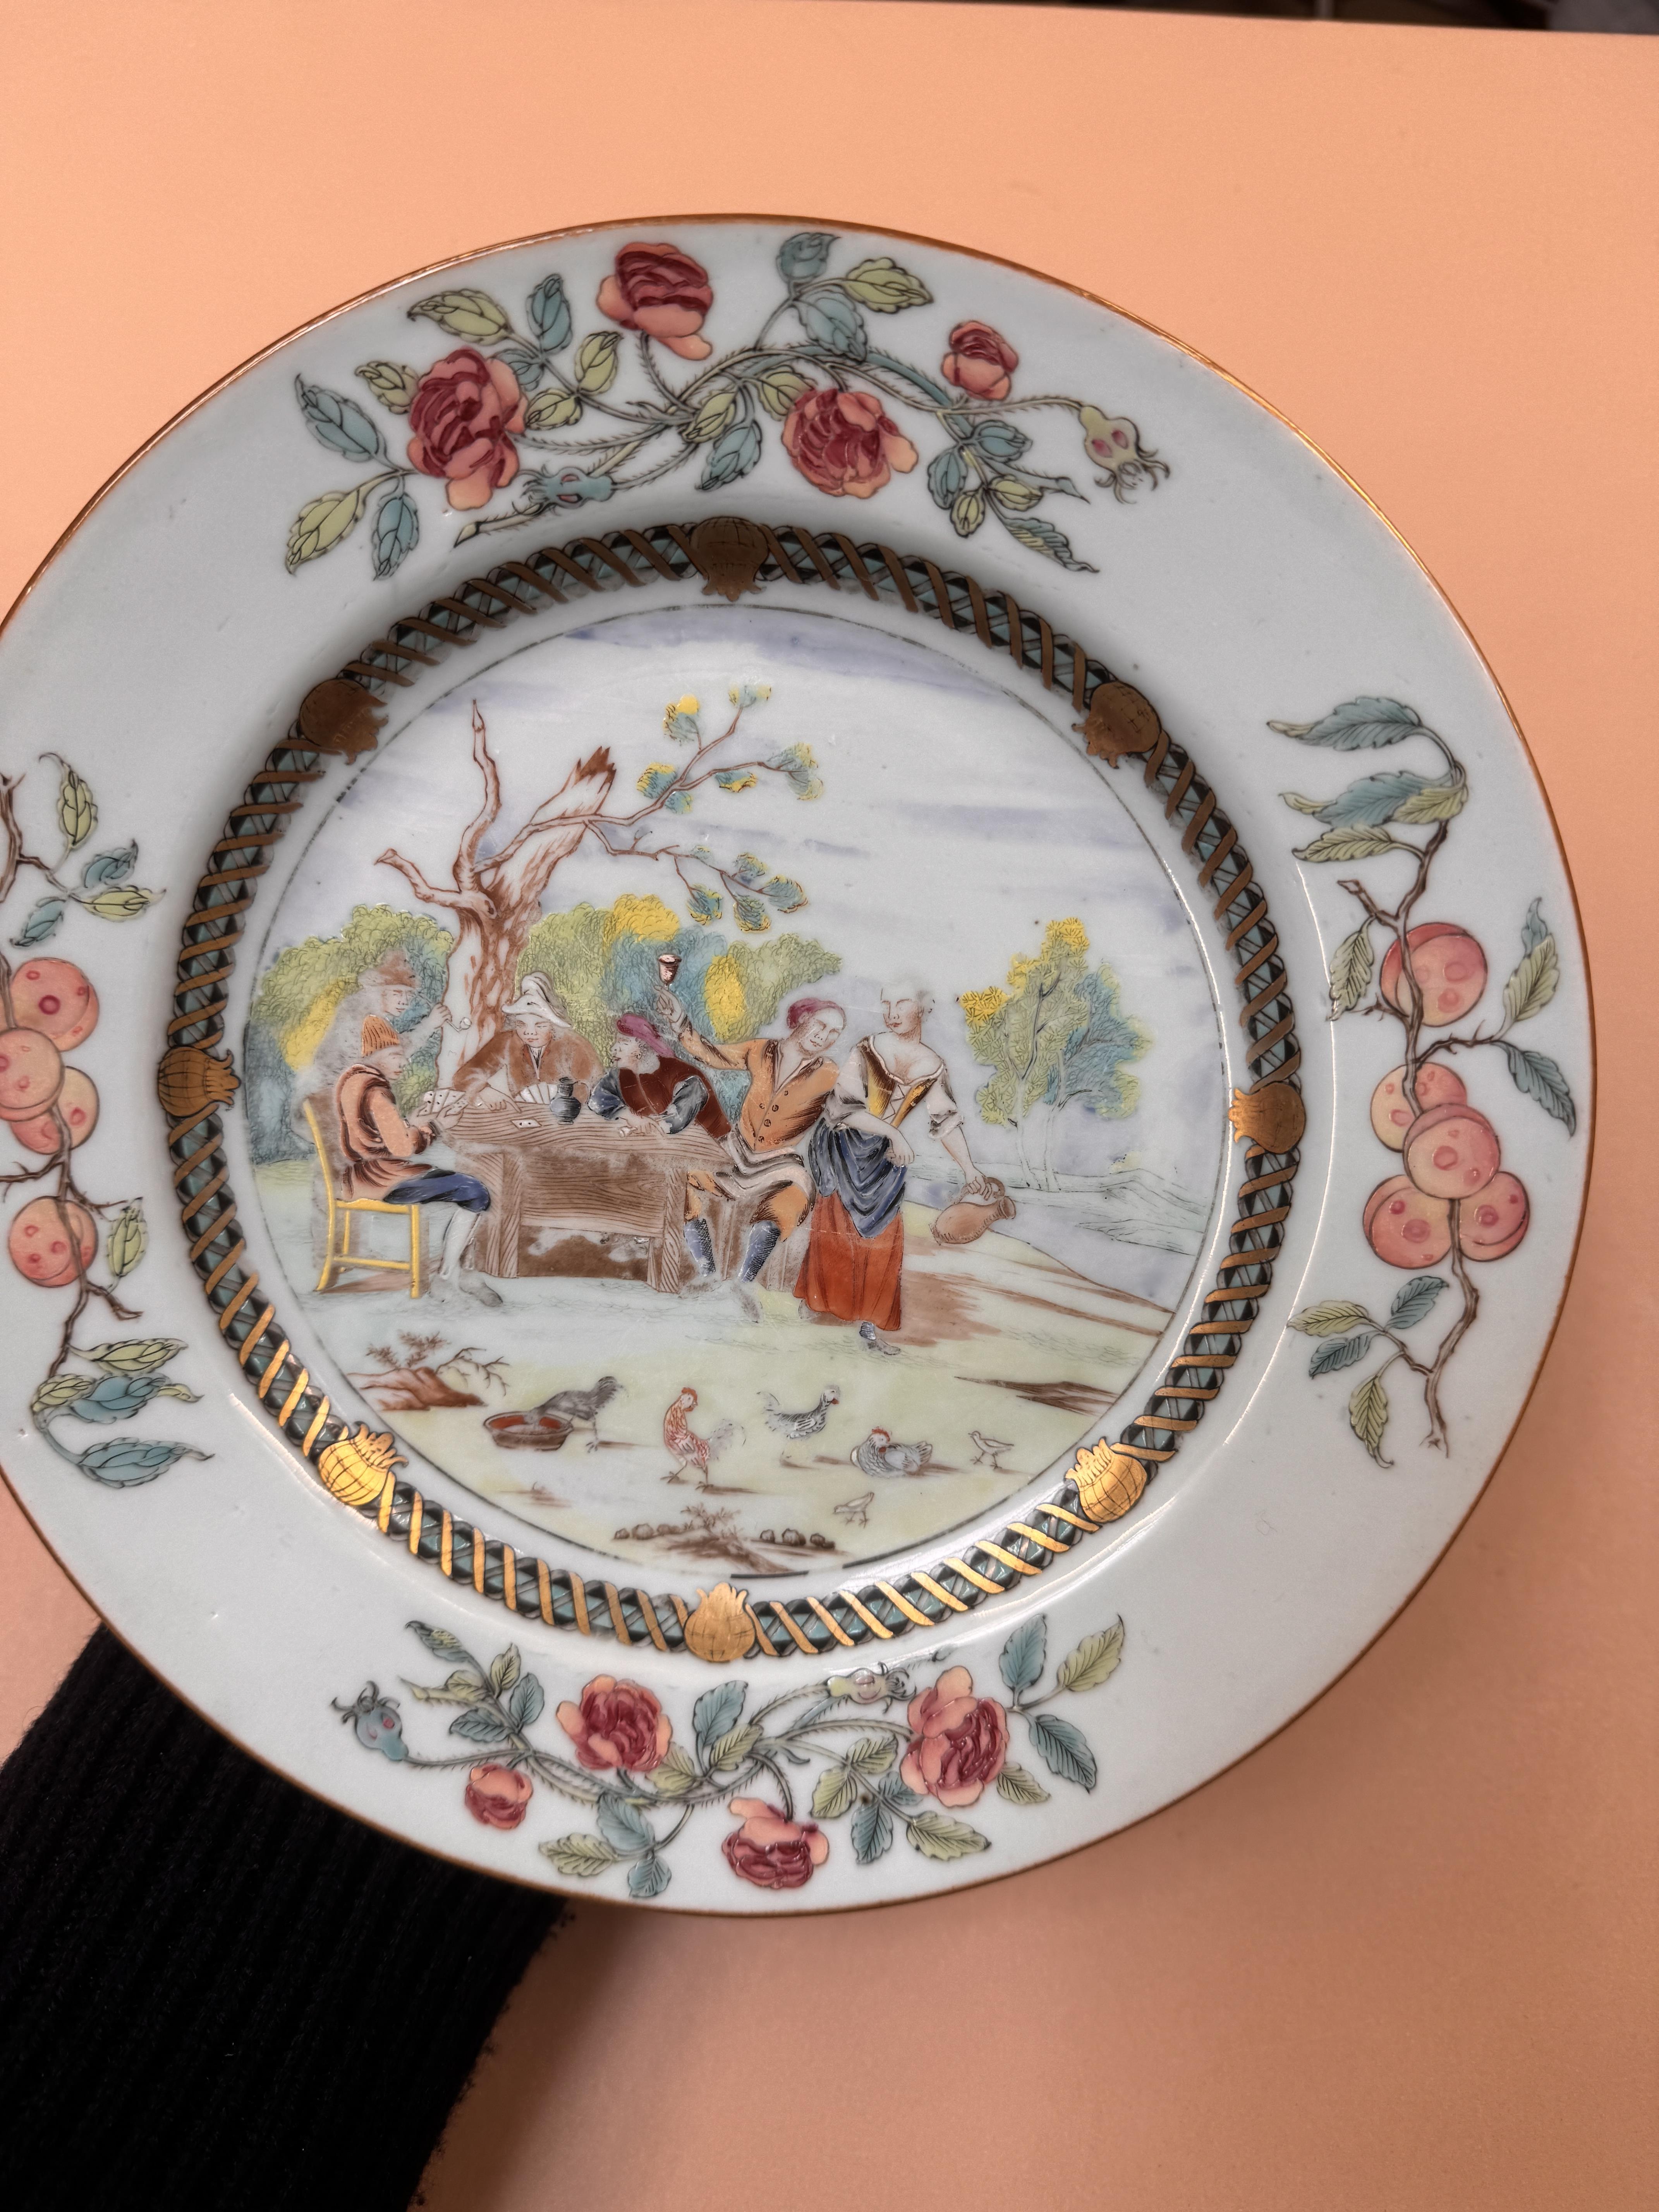 A CHINESE EXPORT FAMILLE ROSE 'CARD PLAYERS' DISH AFTER DAVID TENIERS 清乾隆 十八世紀 約 1740年 外銷粉彩繪西洋人物故事圖紋 - Image 16 of 17